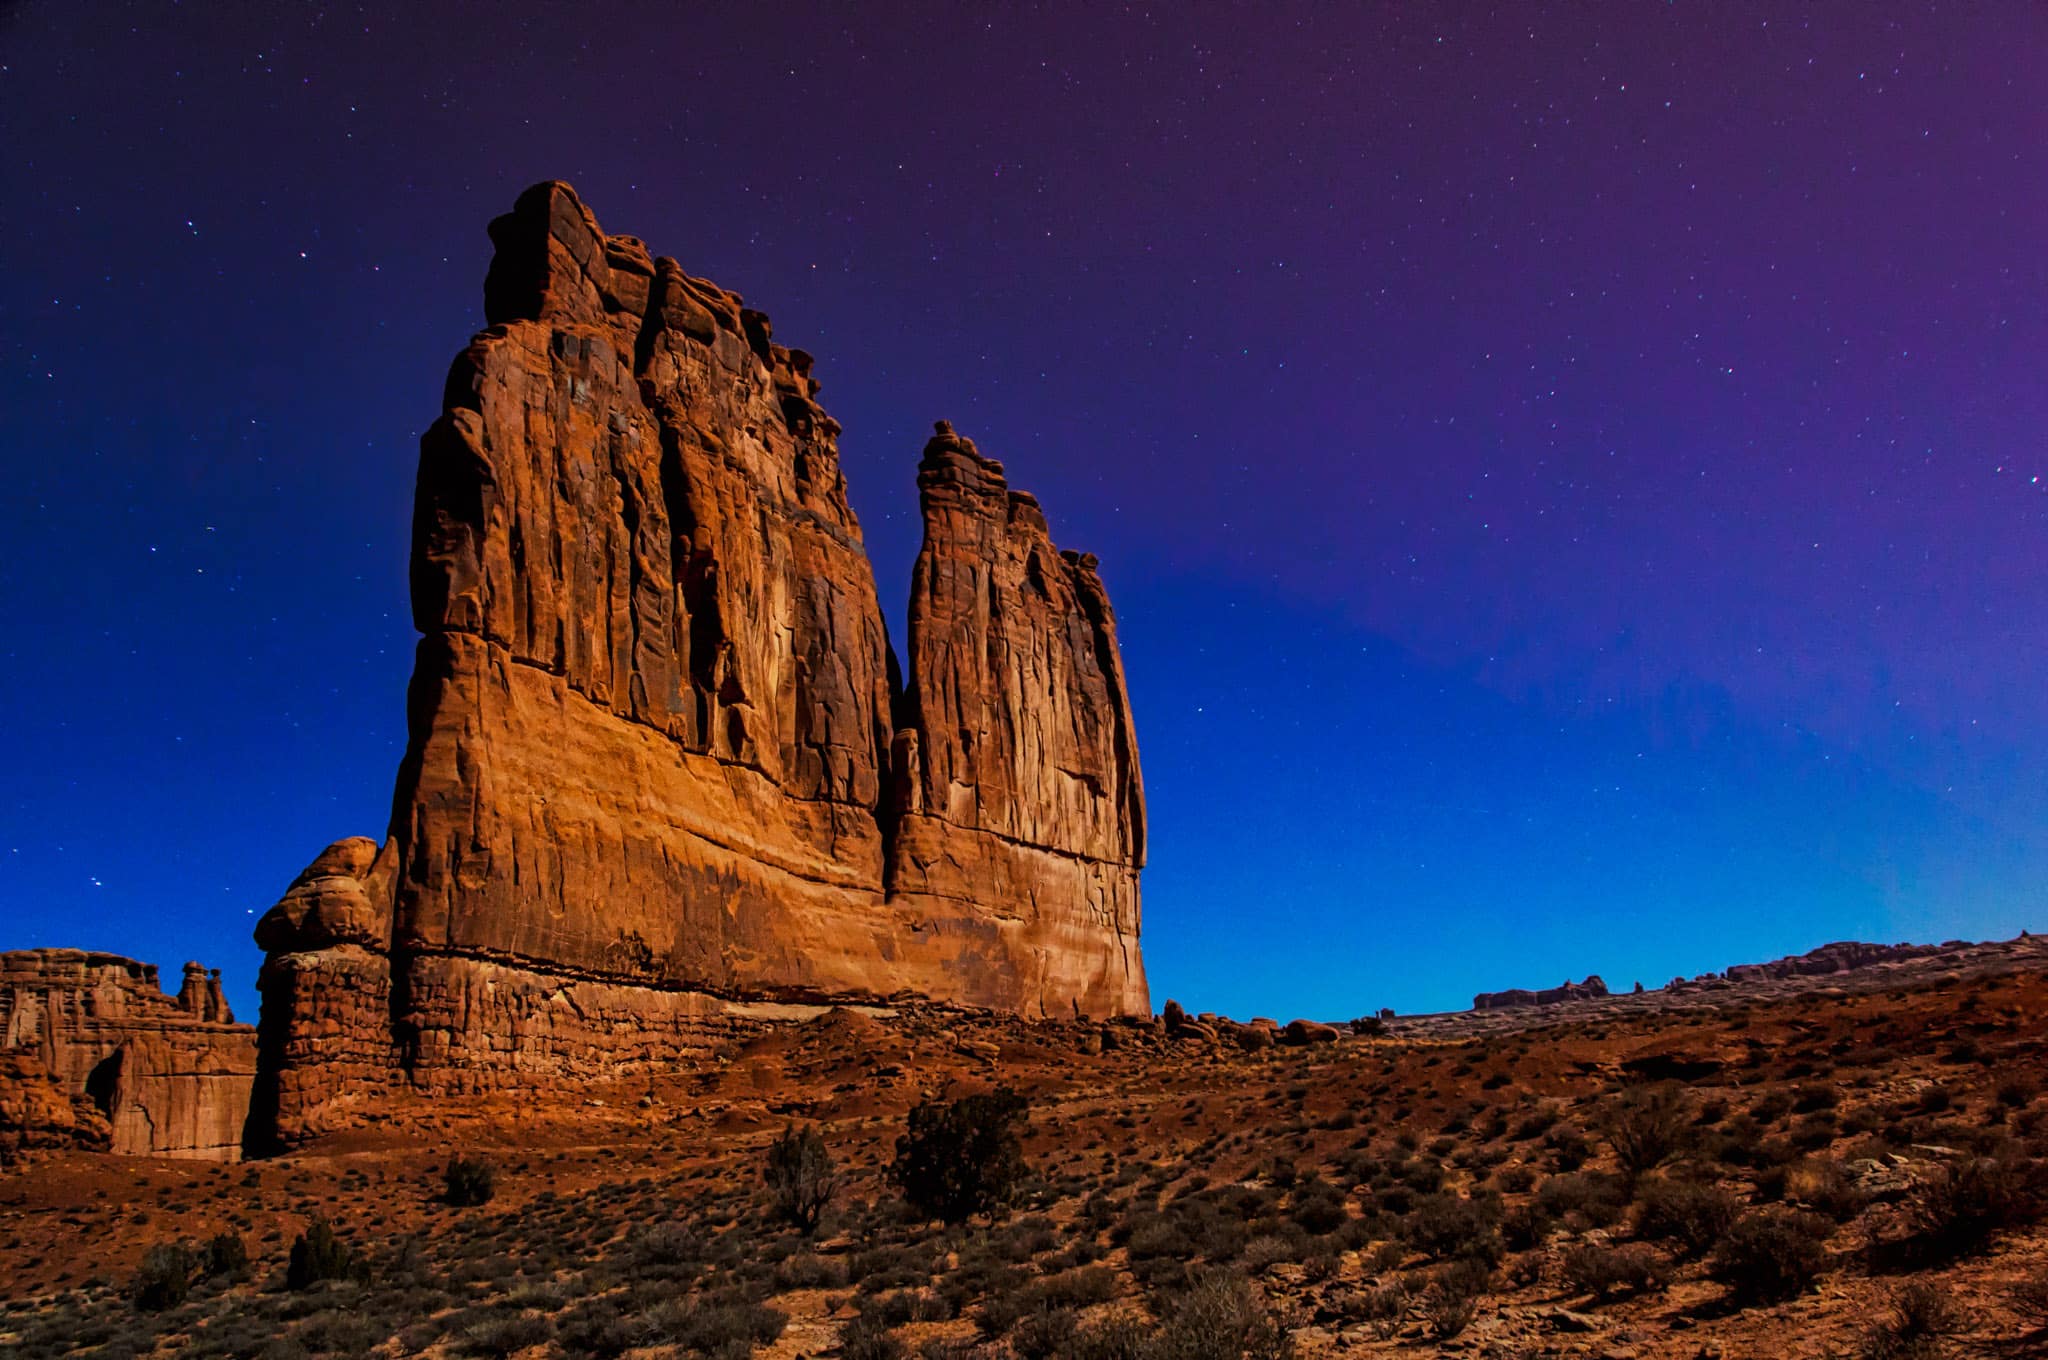 The rock feature called The Organ in Arches National Park.